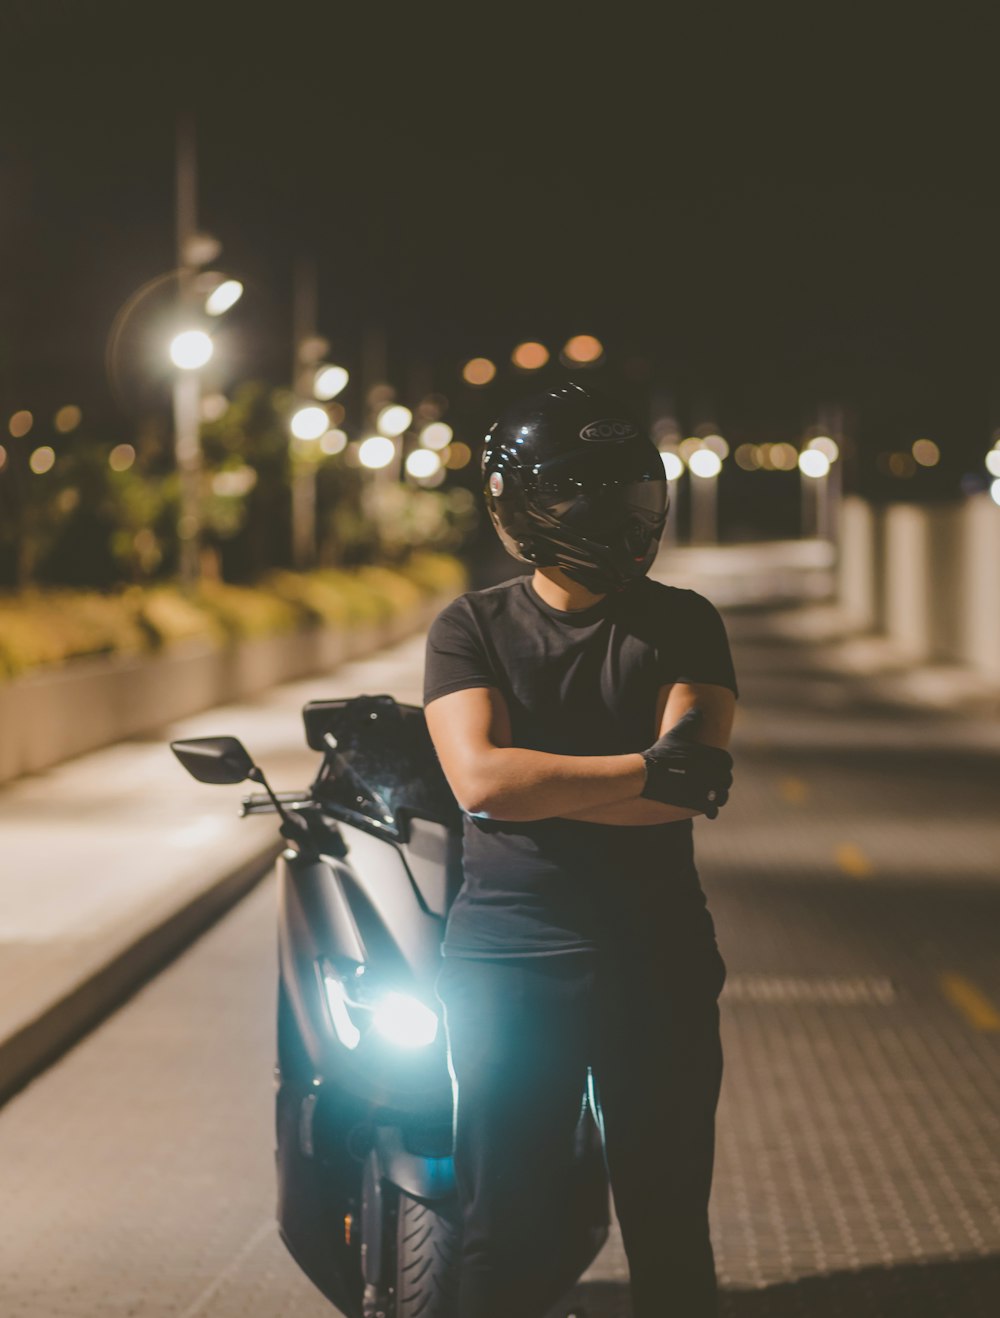 a woman standing next to a motorcycle at night